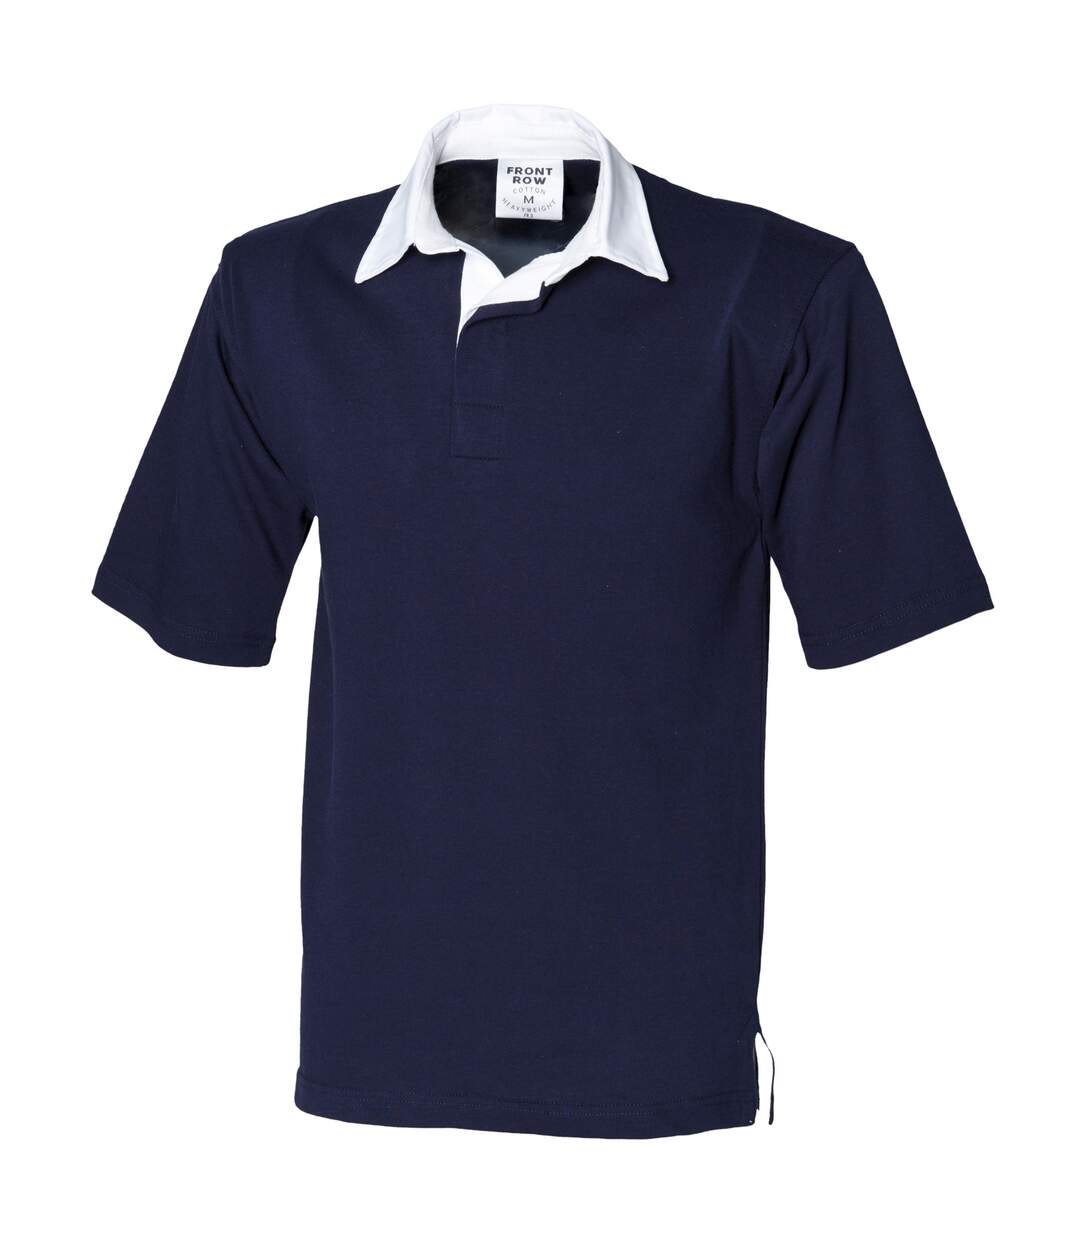 Front Row Short Sleeve Sports Rugby Polo Shirt (Navy)